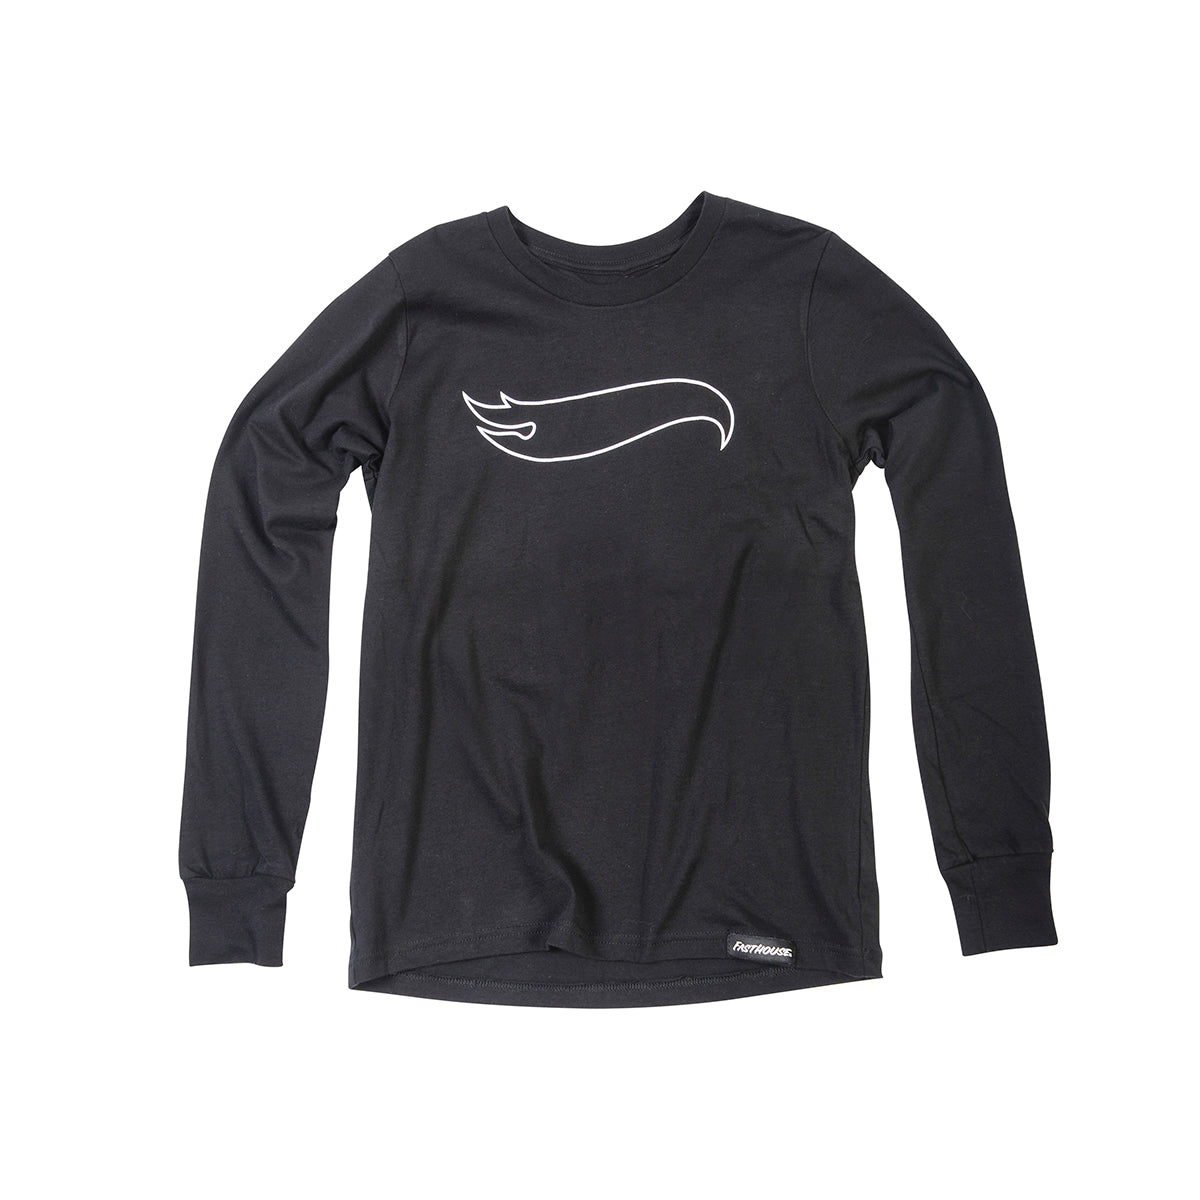 Stacked Hot Wheels Youth LS Tee - Black